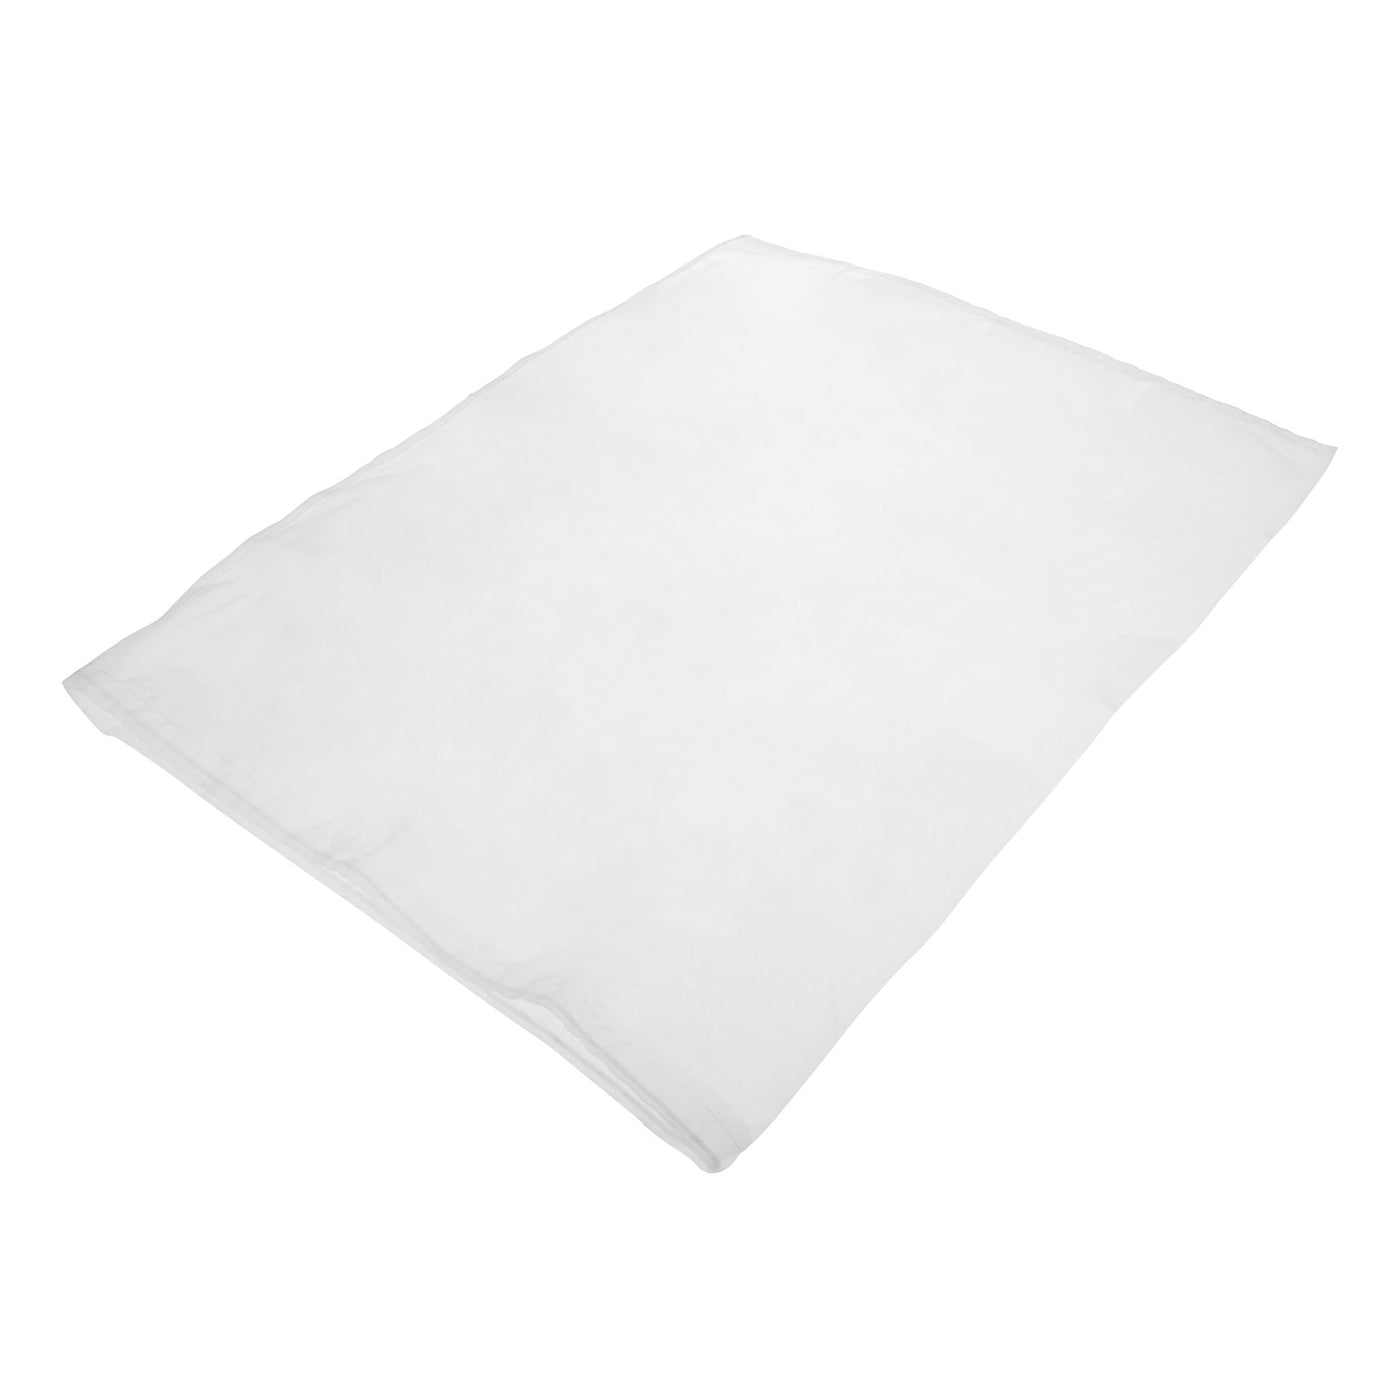 uxcell Uxcell Paint Filter Bag 80 Mesh (17.7"x23.6") Nylon Strainer for Filtering Paint